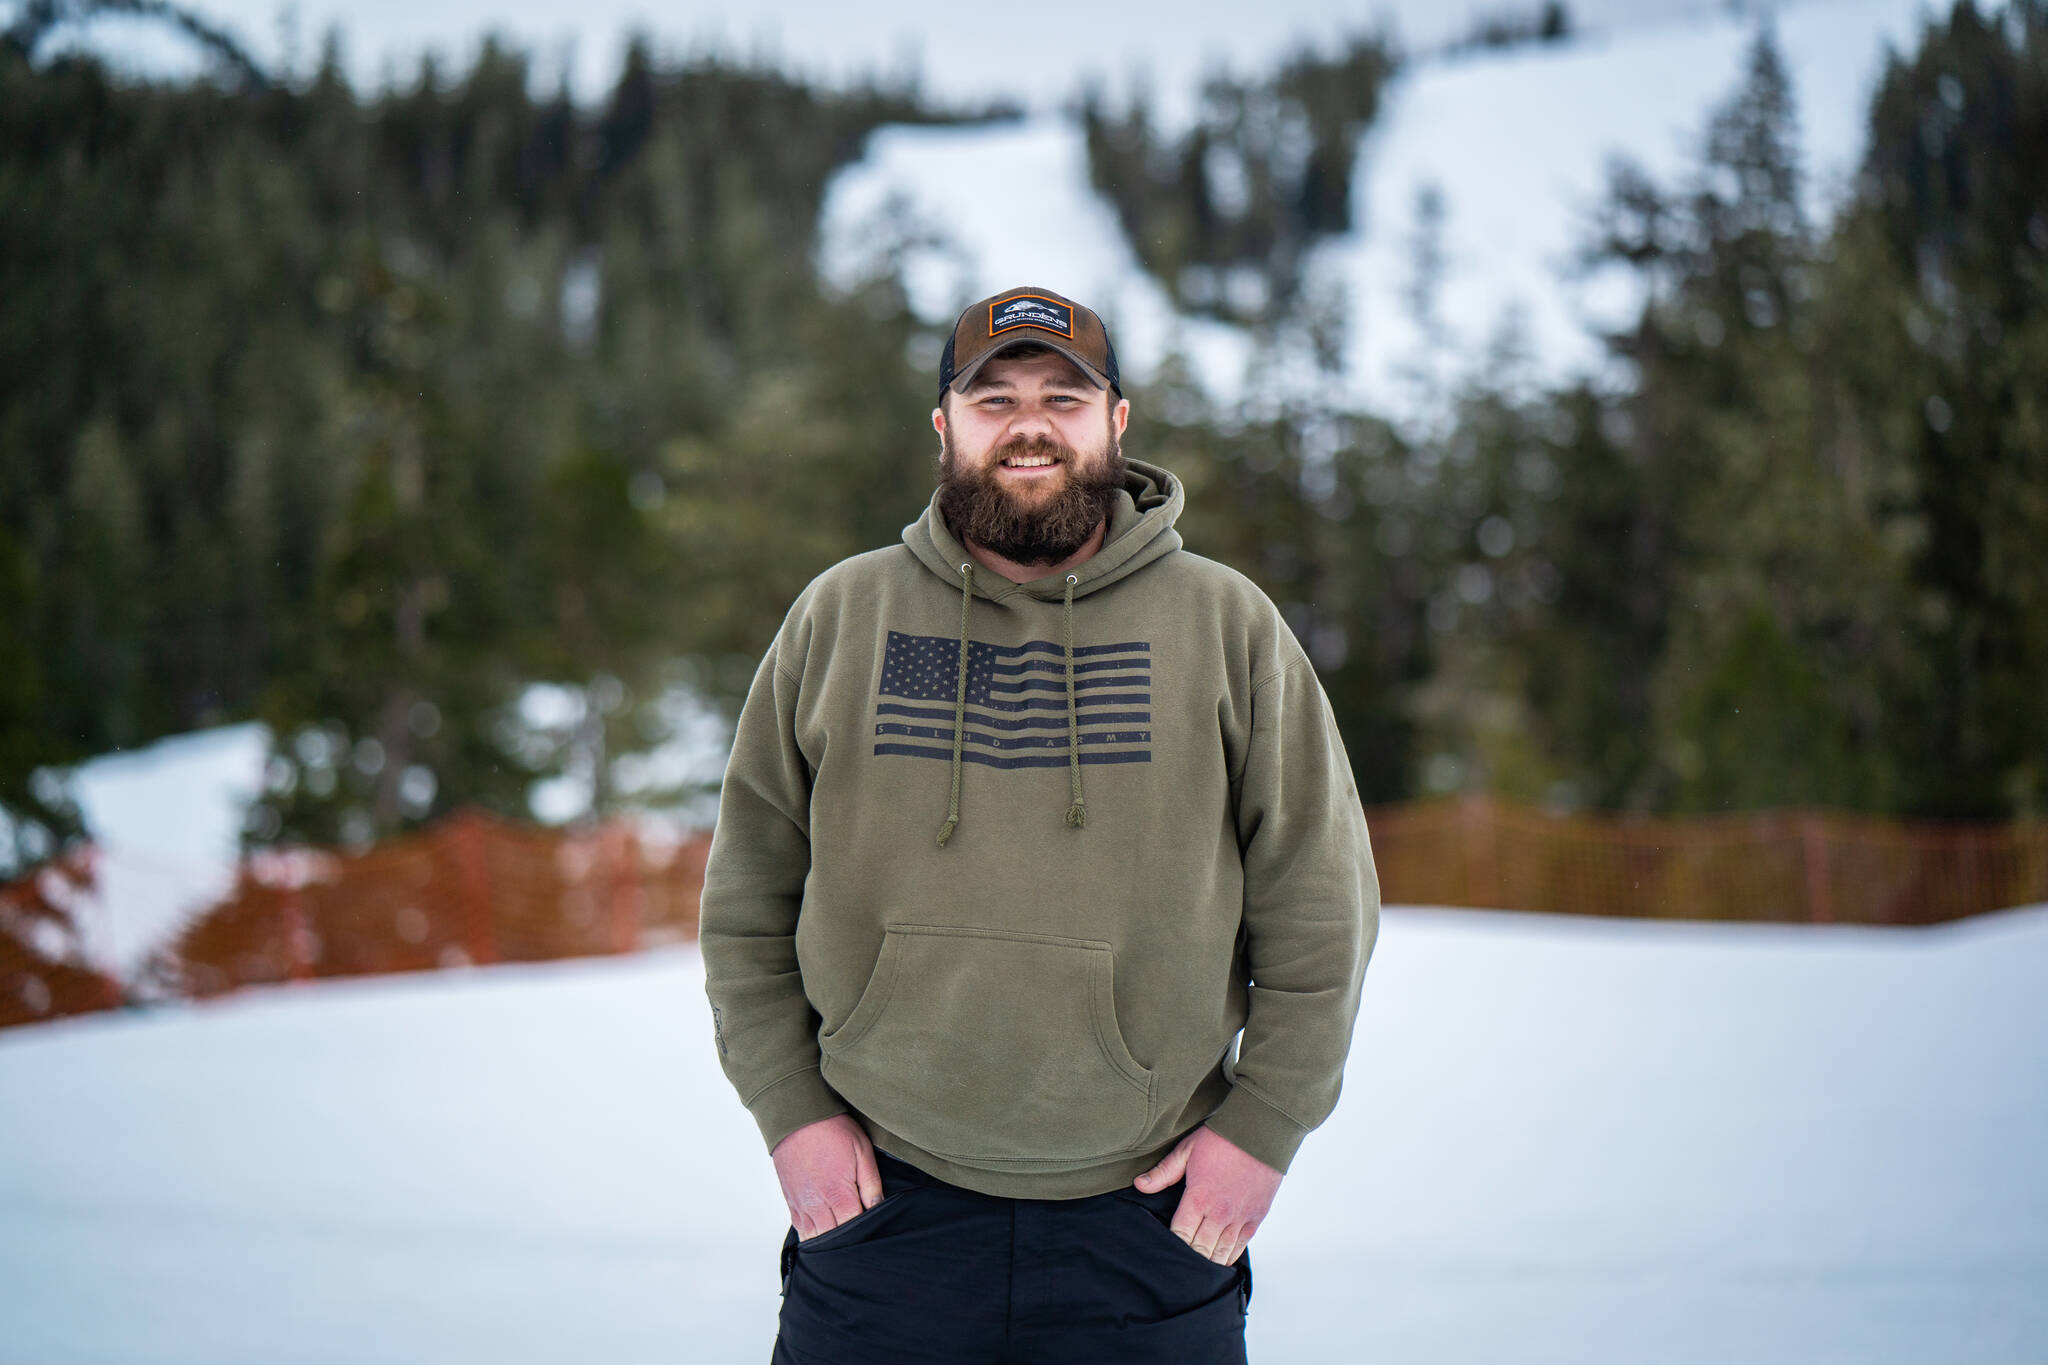 Ben Bullock, outdoor education program coordinator for Douglas Indian Association, stands at the base of Eaglecrest Ski Area, where he typically spends his day coordinating Snow Camp alongside volunteers, chaperones and Eaglecrest staff.